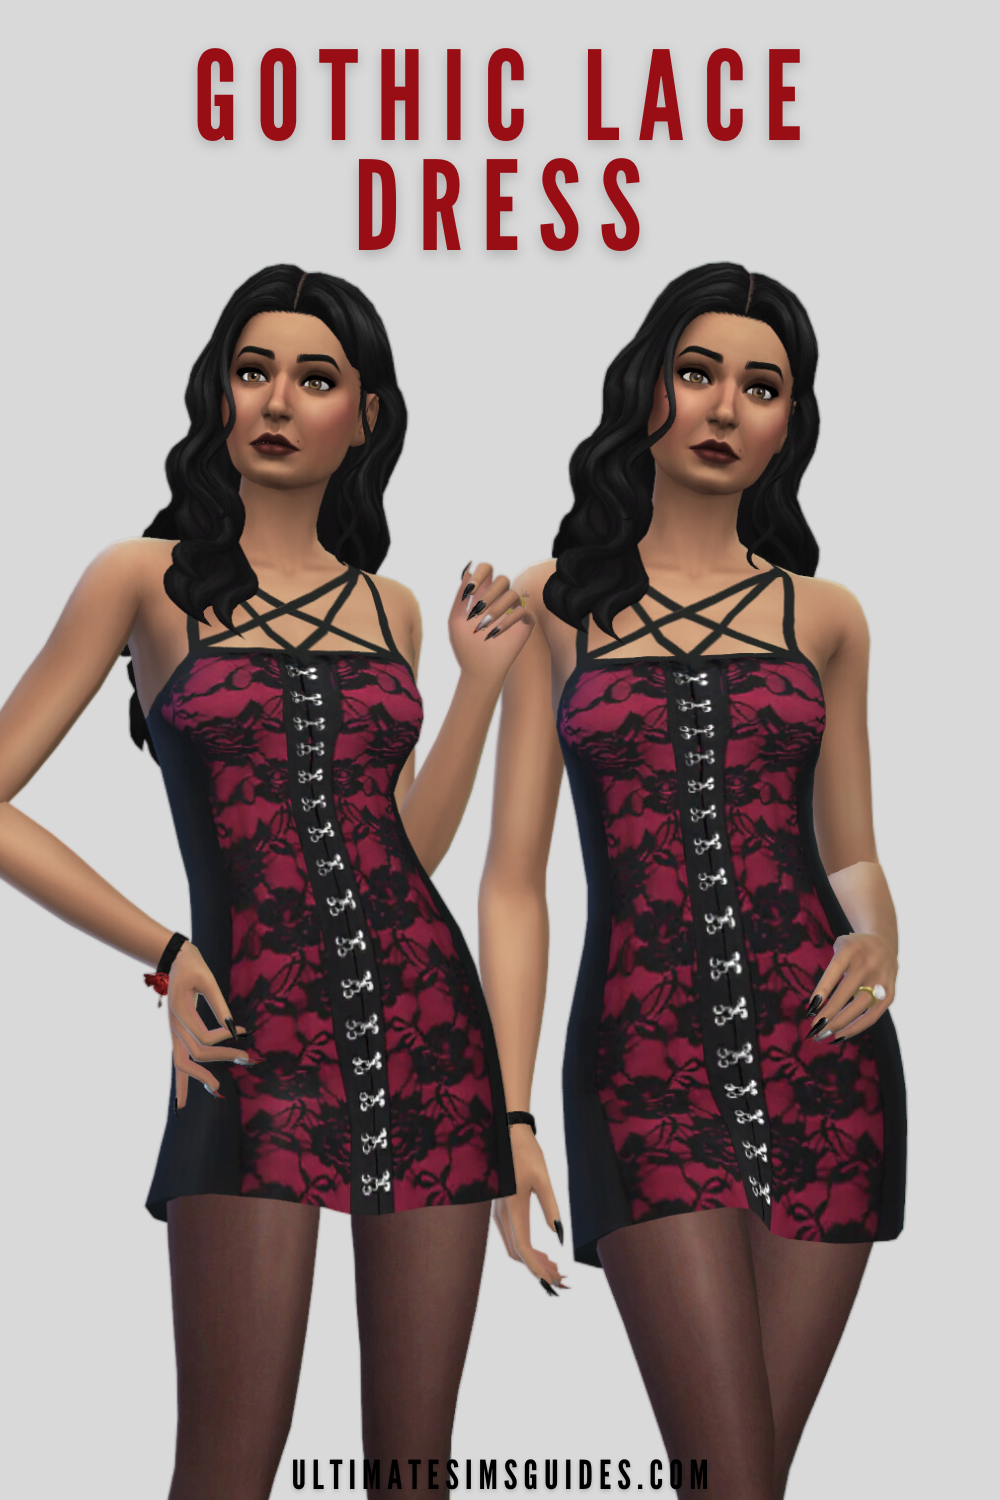 The words "Gothic Lace Dress" in red text on top of a grey background, under that is two images of the same sim who are wearing tights, a red and black lace dress, and a bracelet.